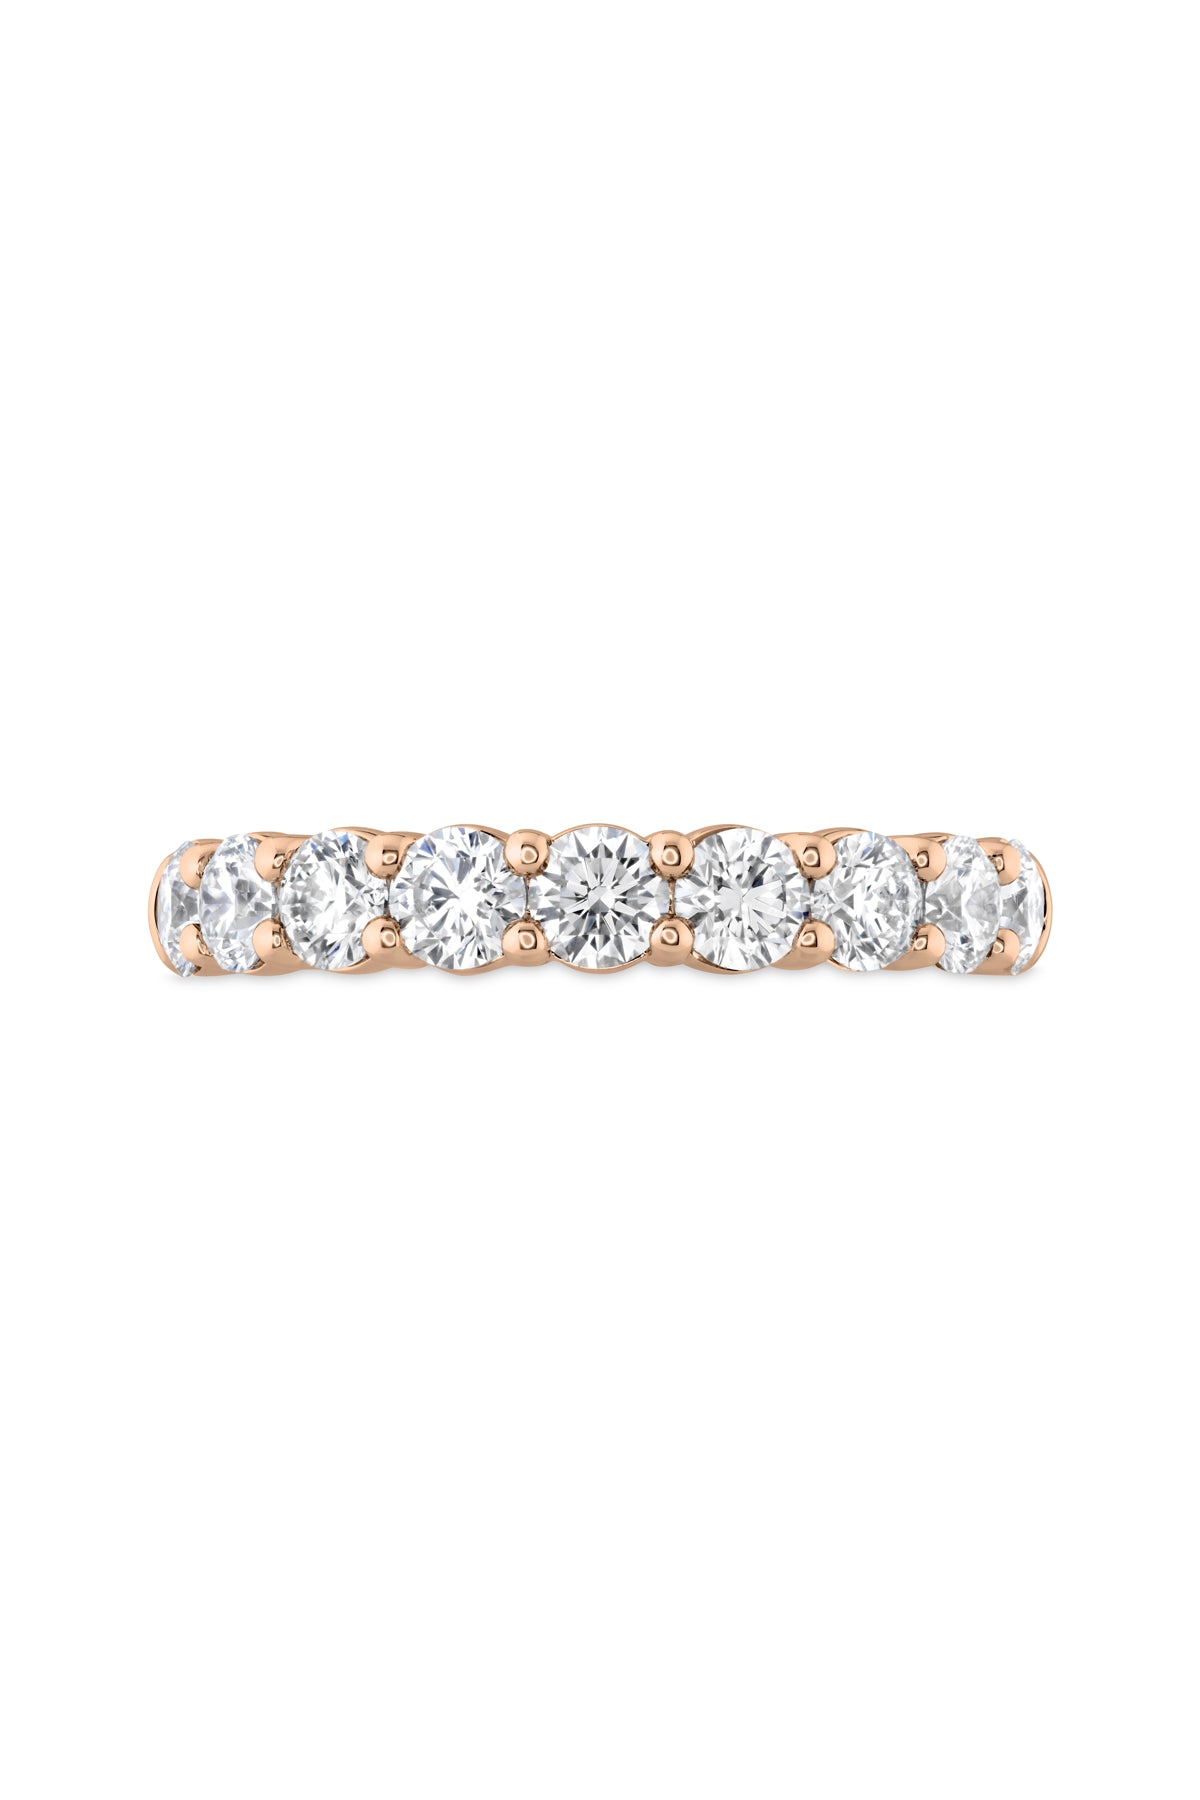 Signature 9 Stone Band From Hearts On Fire available at LeGassick Diamonds and Jewellery Gold Coast, Australia.